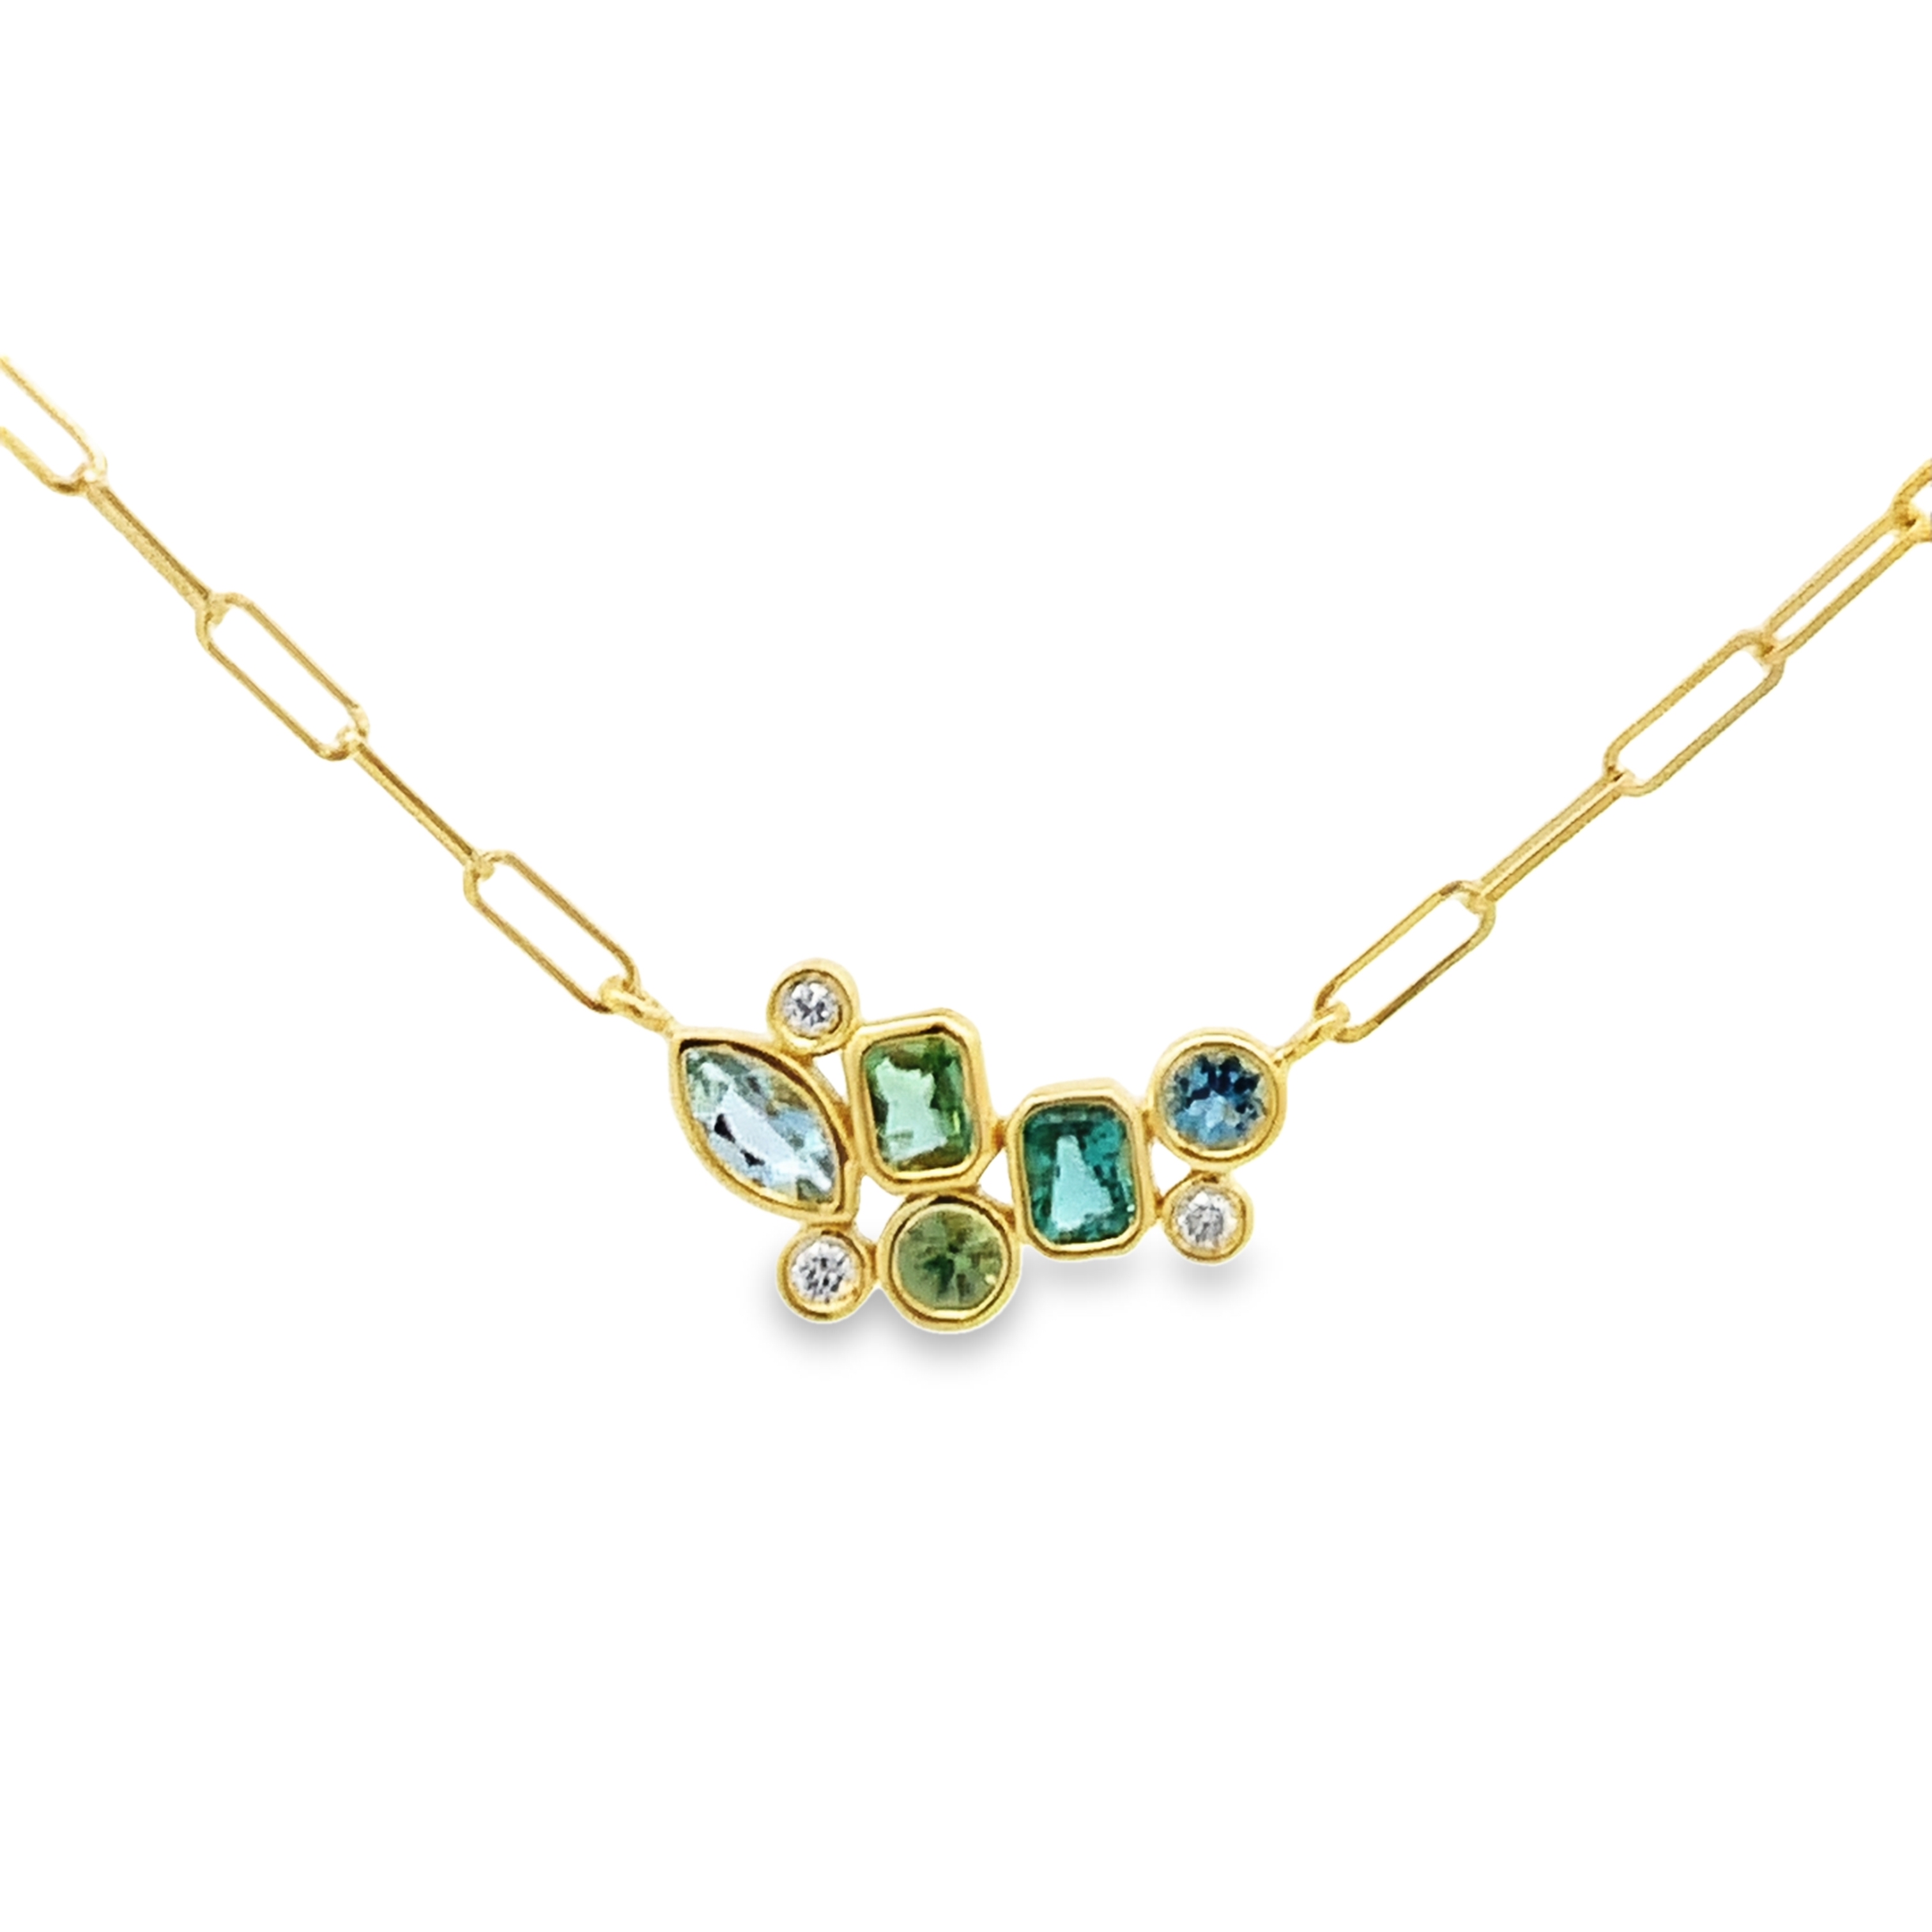 Lauren K 18K Yellow Gold Green and Blue Bubble Cluster Necklace